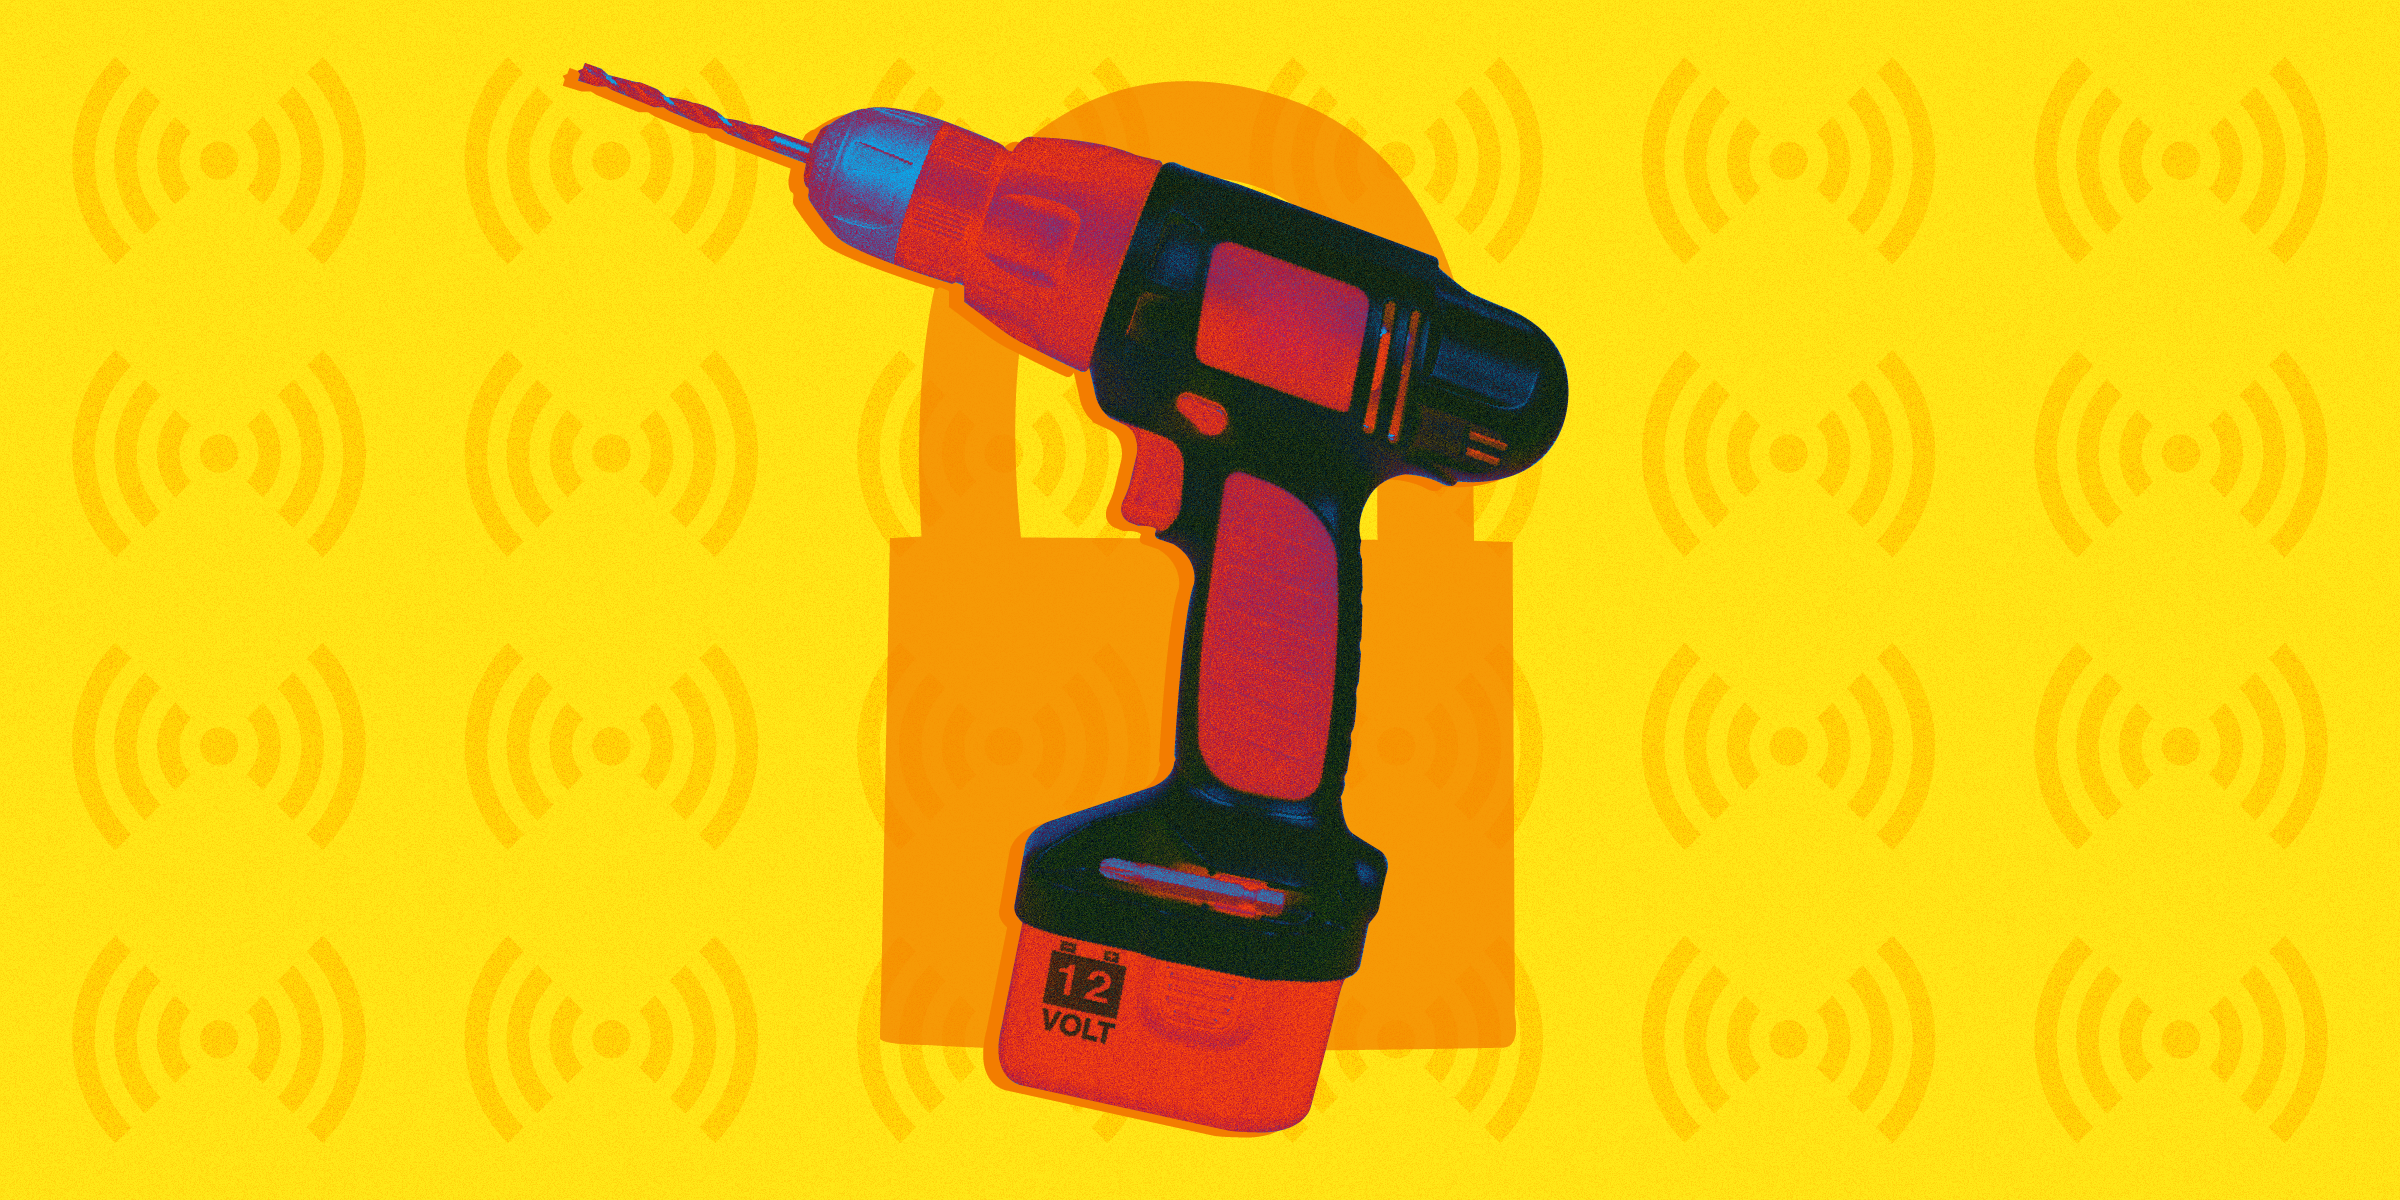 a power drill on top of a yellow background with a large padlock and alarm symbols